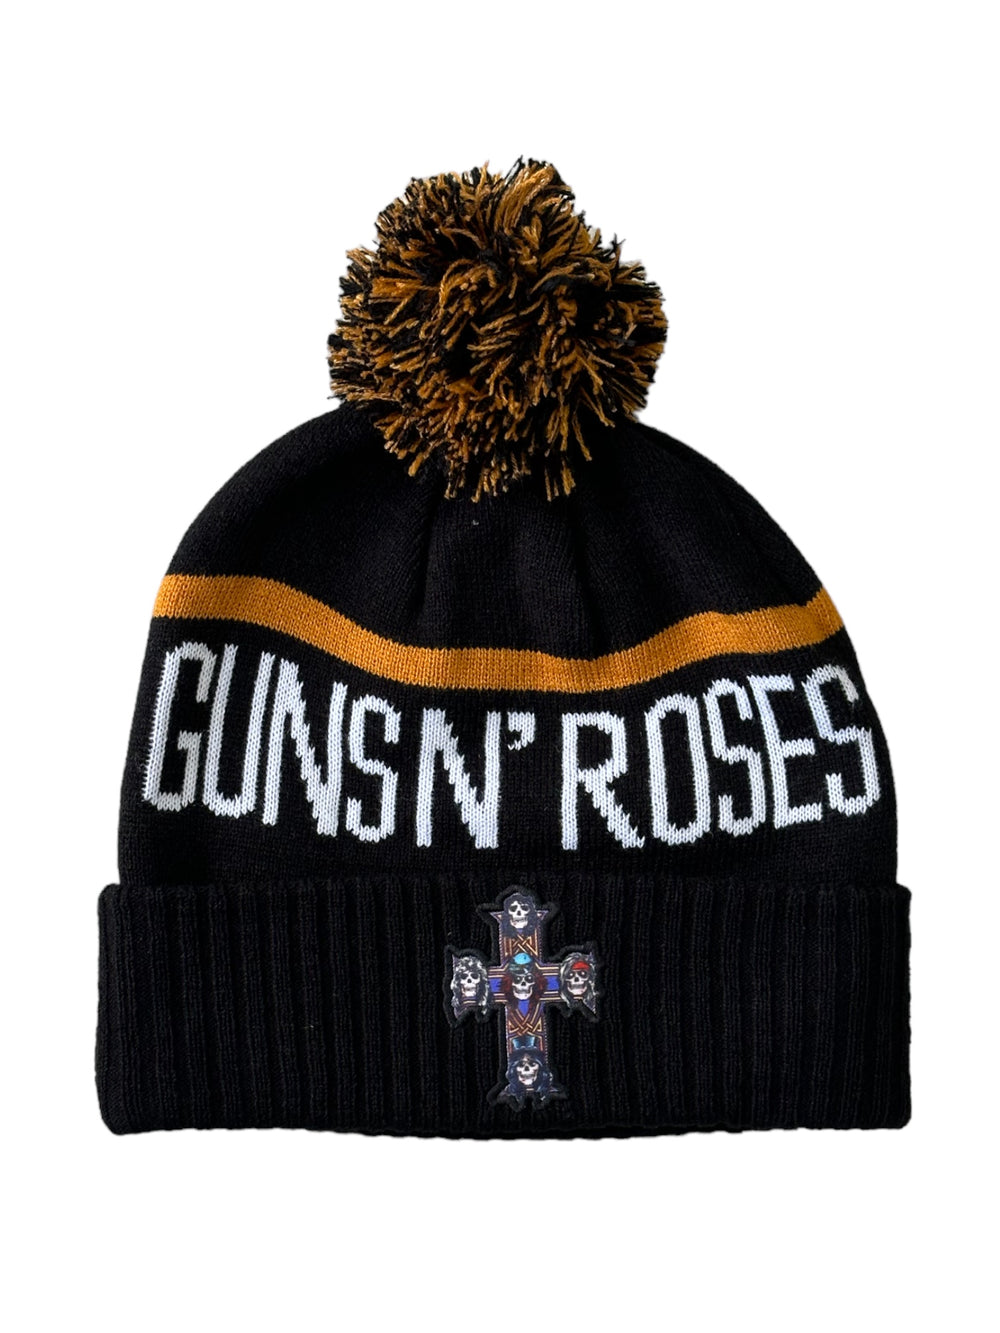 Guns N' Roses Official Roll Up Bobble Beanie Hat One Size Fits All - NEW